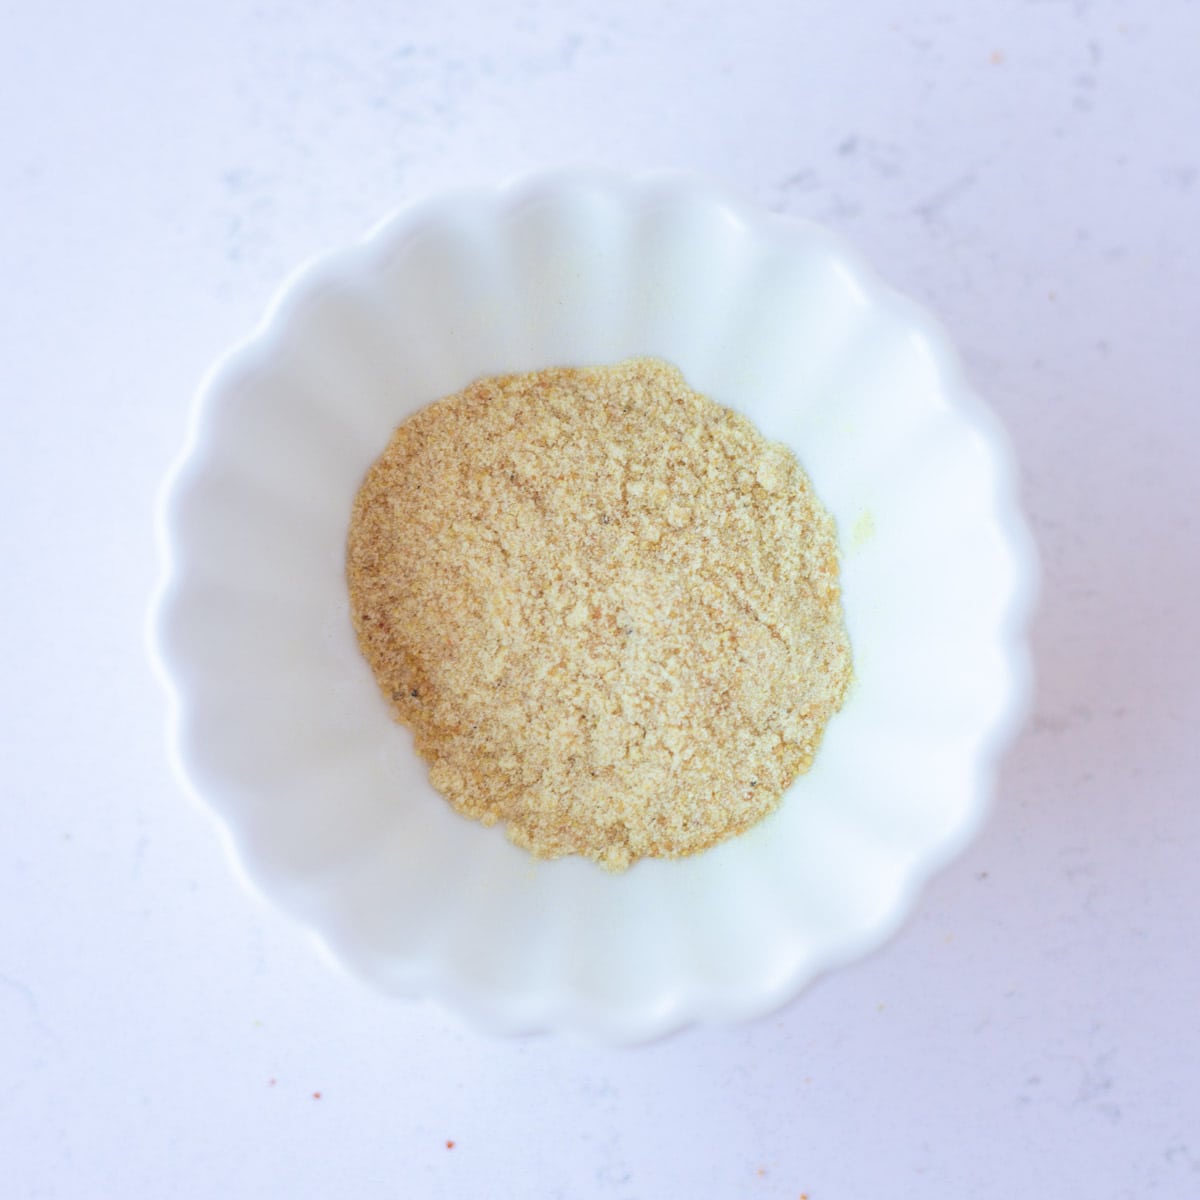 Asafoetida in a small white bowl.